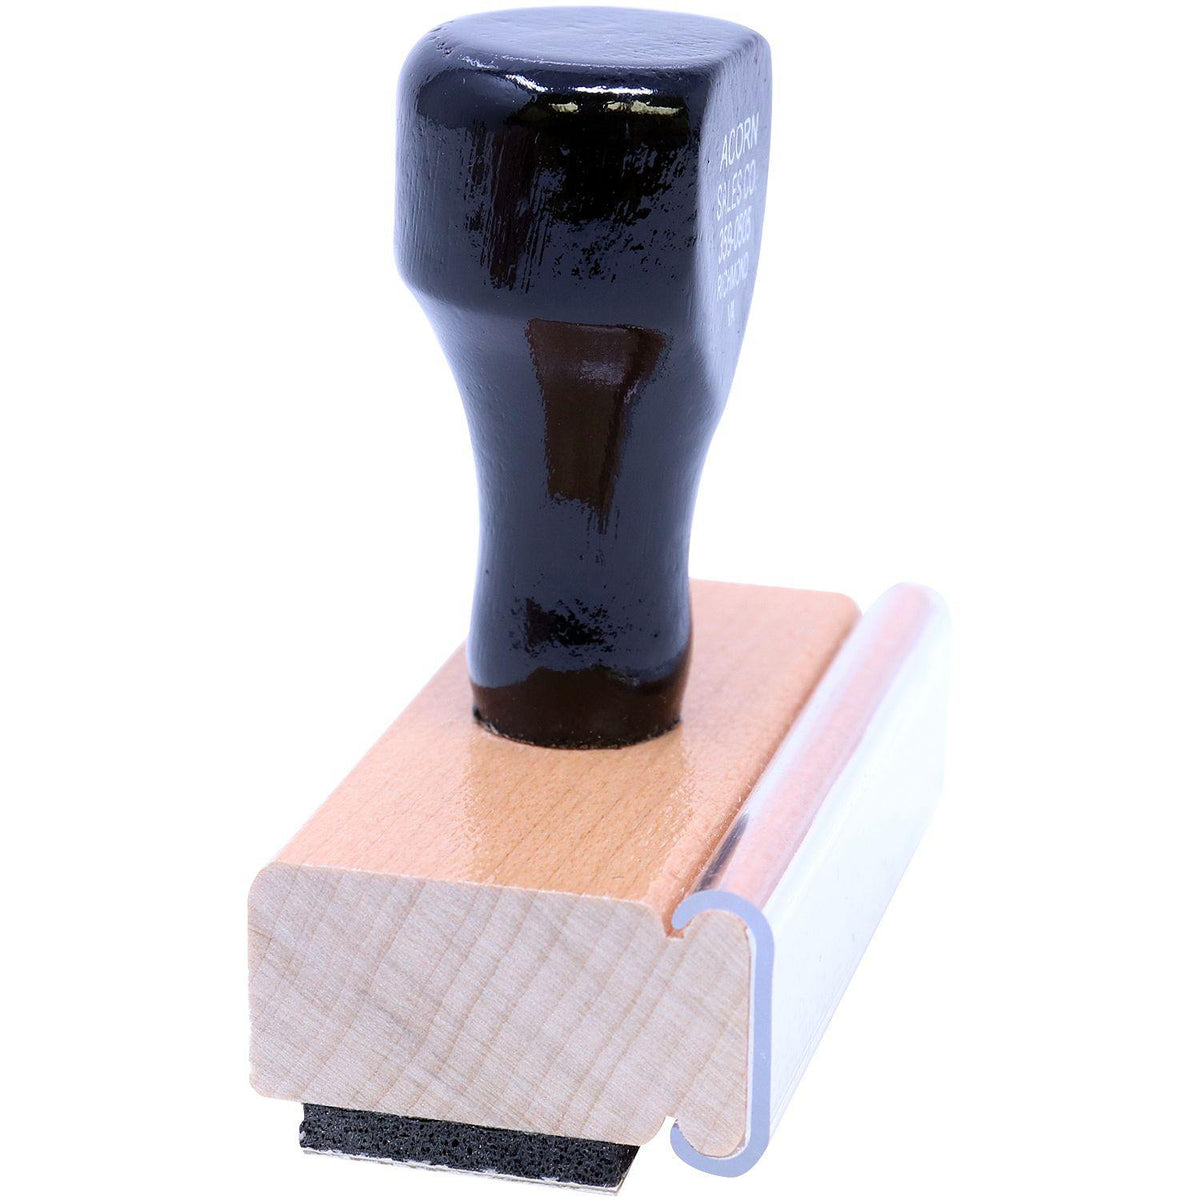 Side View of Italic Personal Confidential Rubber Stamp at an Angle